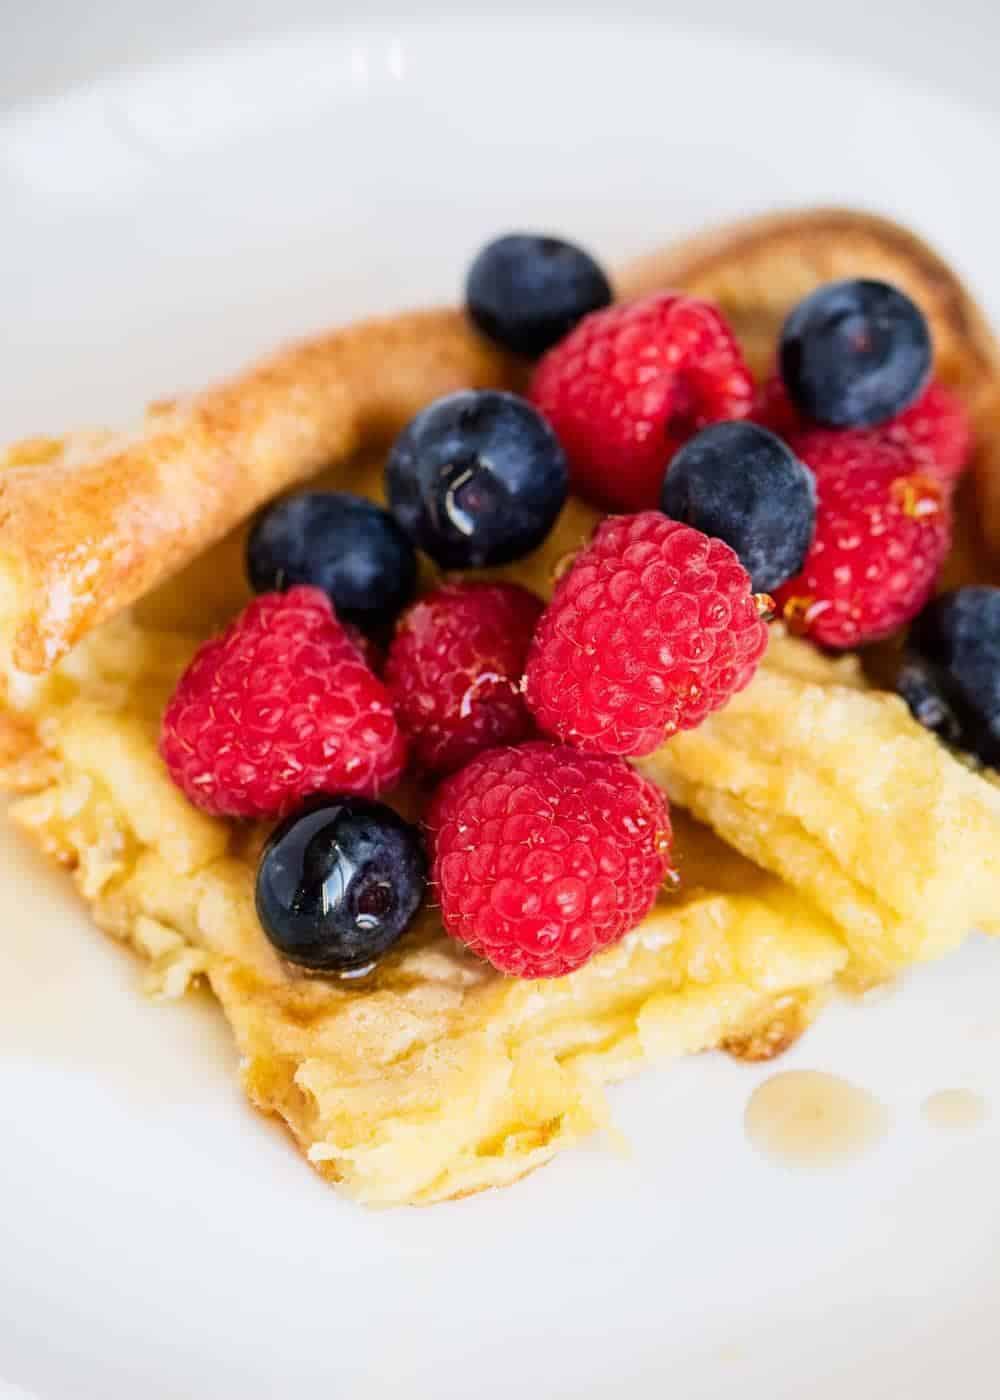 German pancakes topped with syrup and berries.